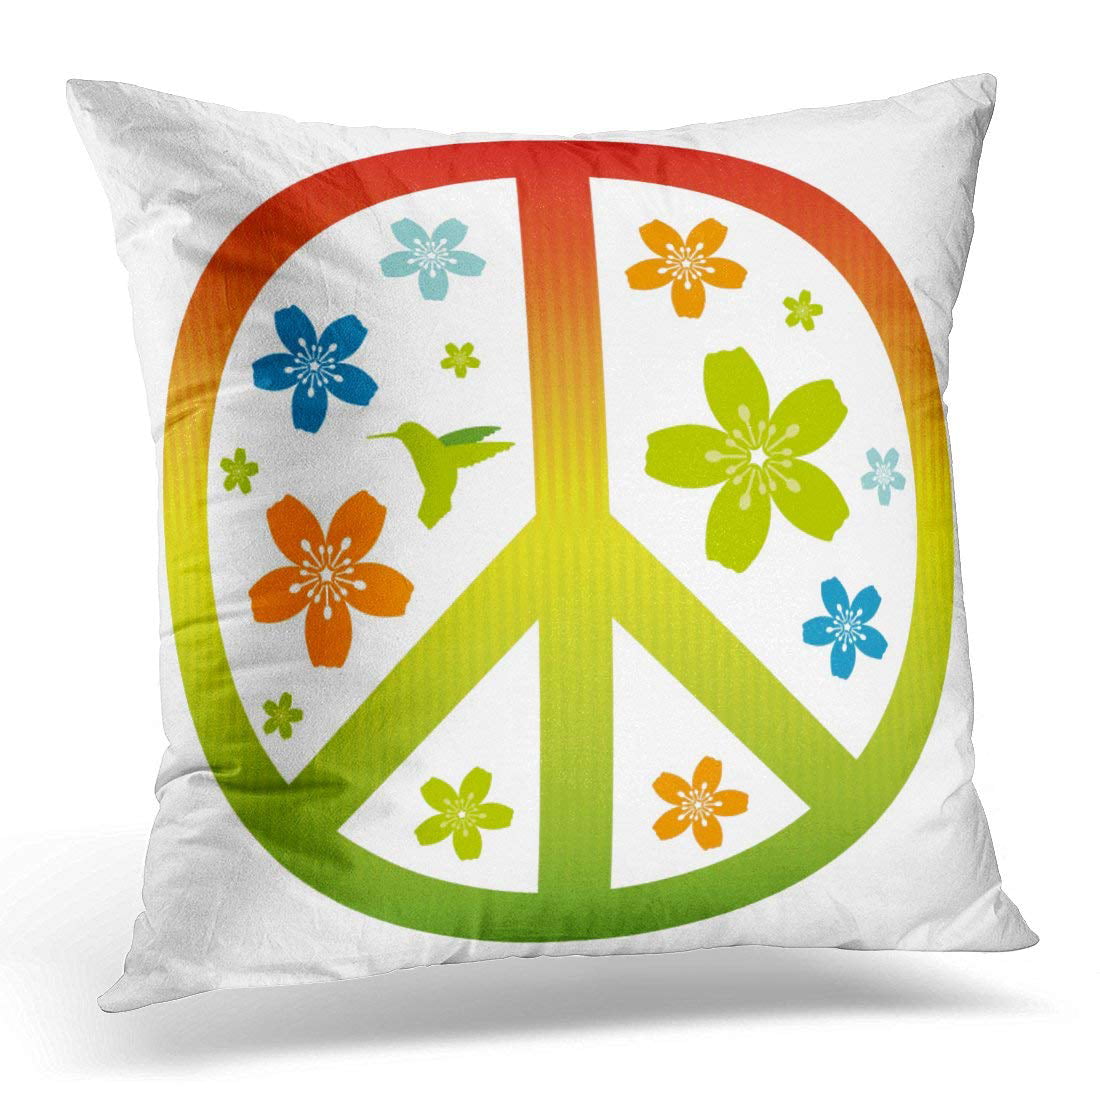 16x16 Multicolor Peaceful Society Life Whole World Love Truce Colorful Watercolor Peace Logo Sign for Unity of All Human Throw Pillow